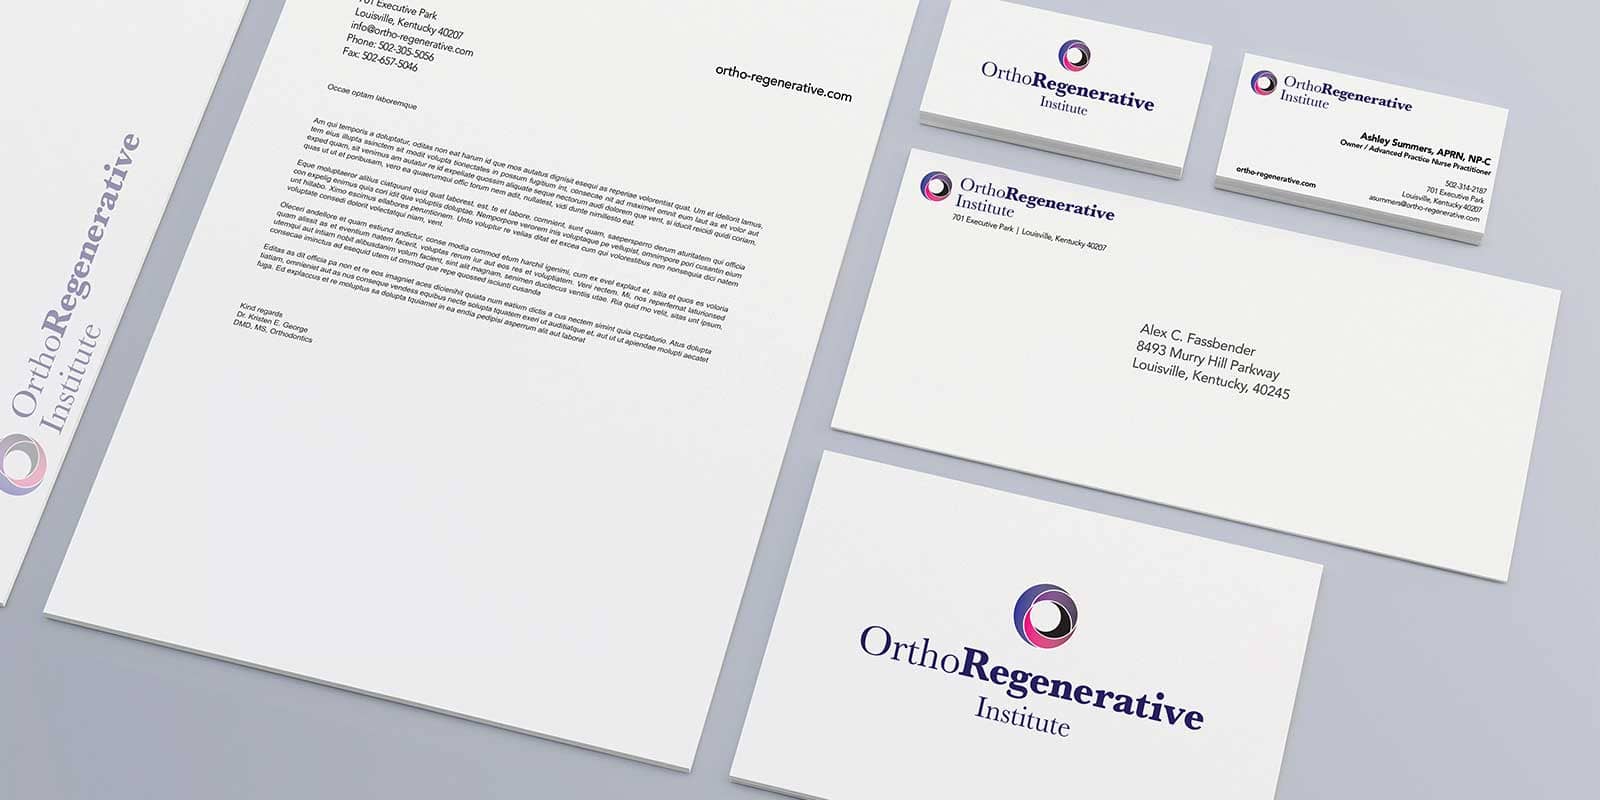 OrthoRegenerative Institute Brand Collateral by Gold Creative Design in Louisville, KY - Stationary Set